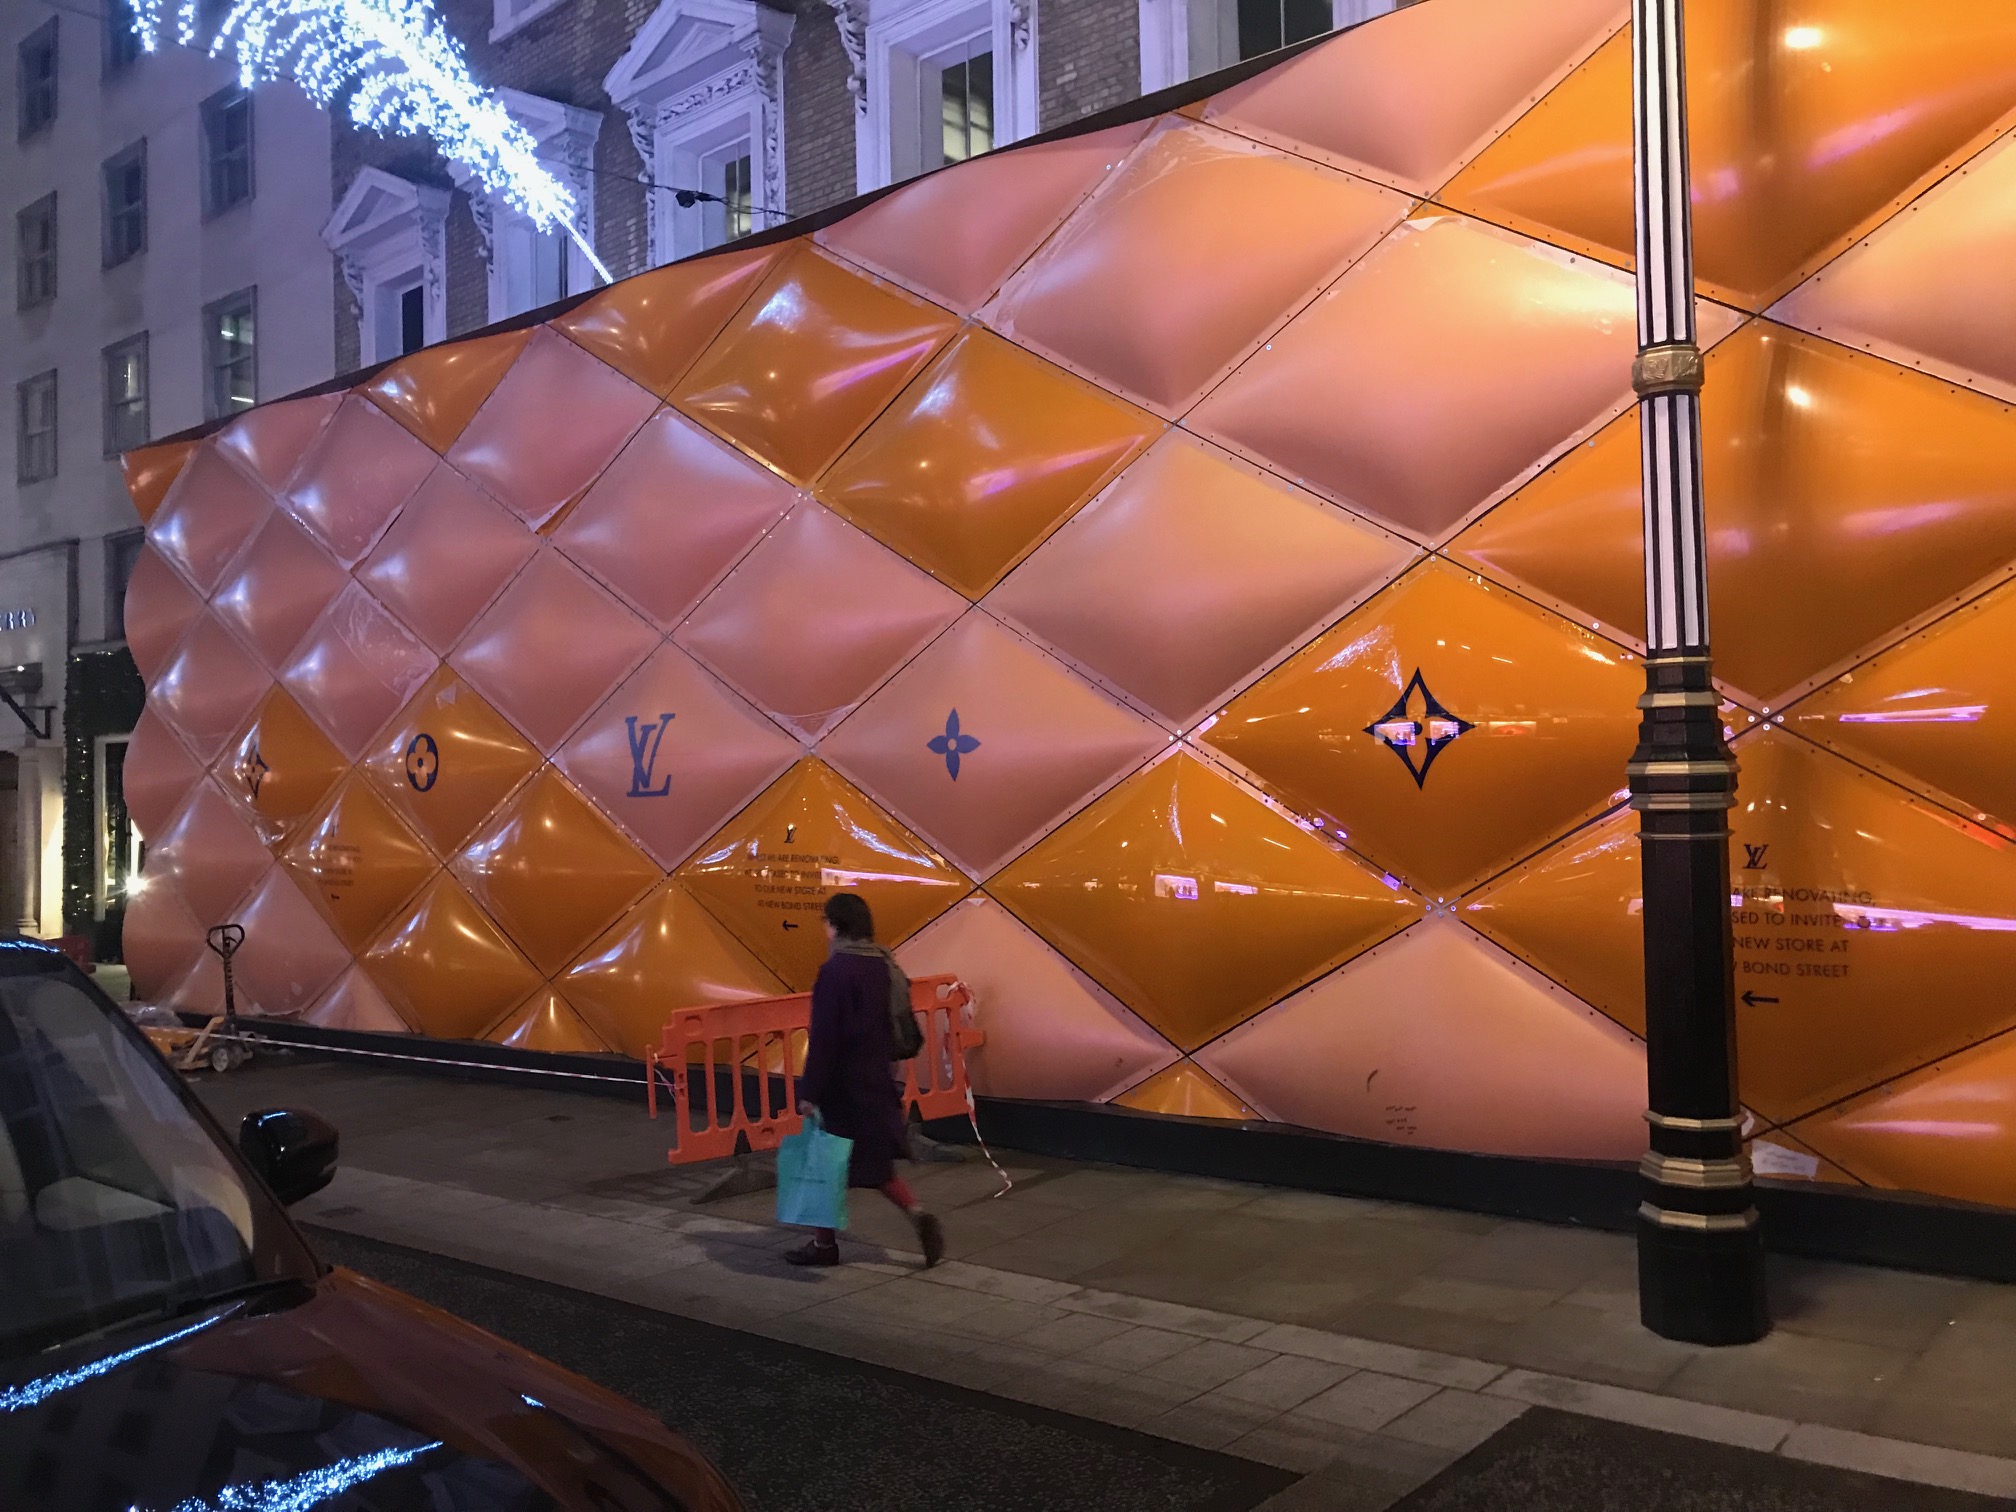 A classically-dressed English gentleman walks past the temporary renovation  hoarding of luxury brand Louis Vuitton in New Bond Street, on 27th February  2019, in London, England Stock Photo - Alamy